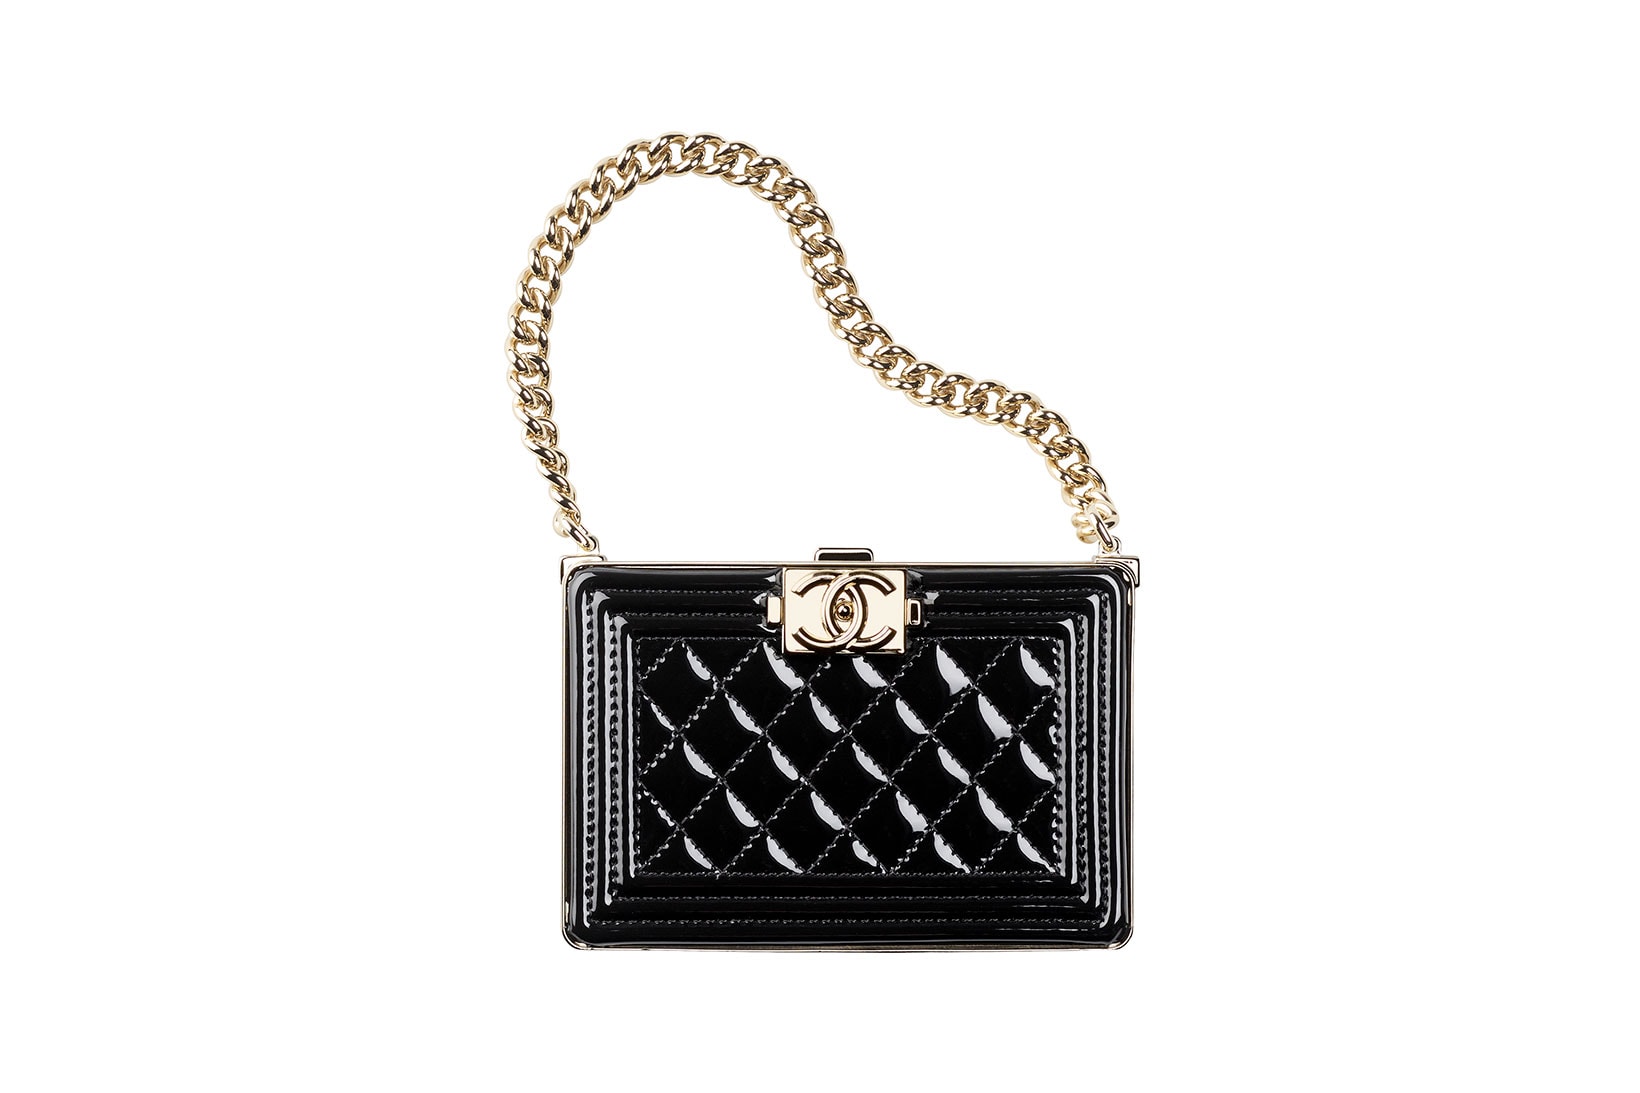 Chanel Métiers D’Art Collection Small Leather Goods Minaudiere Black